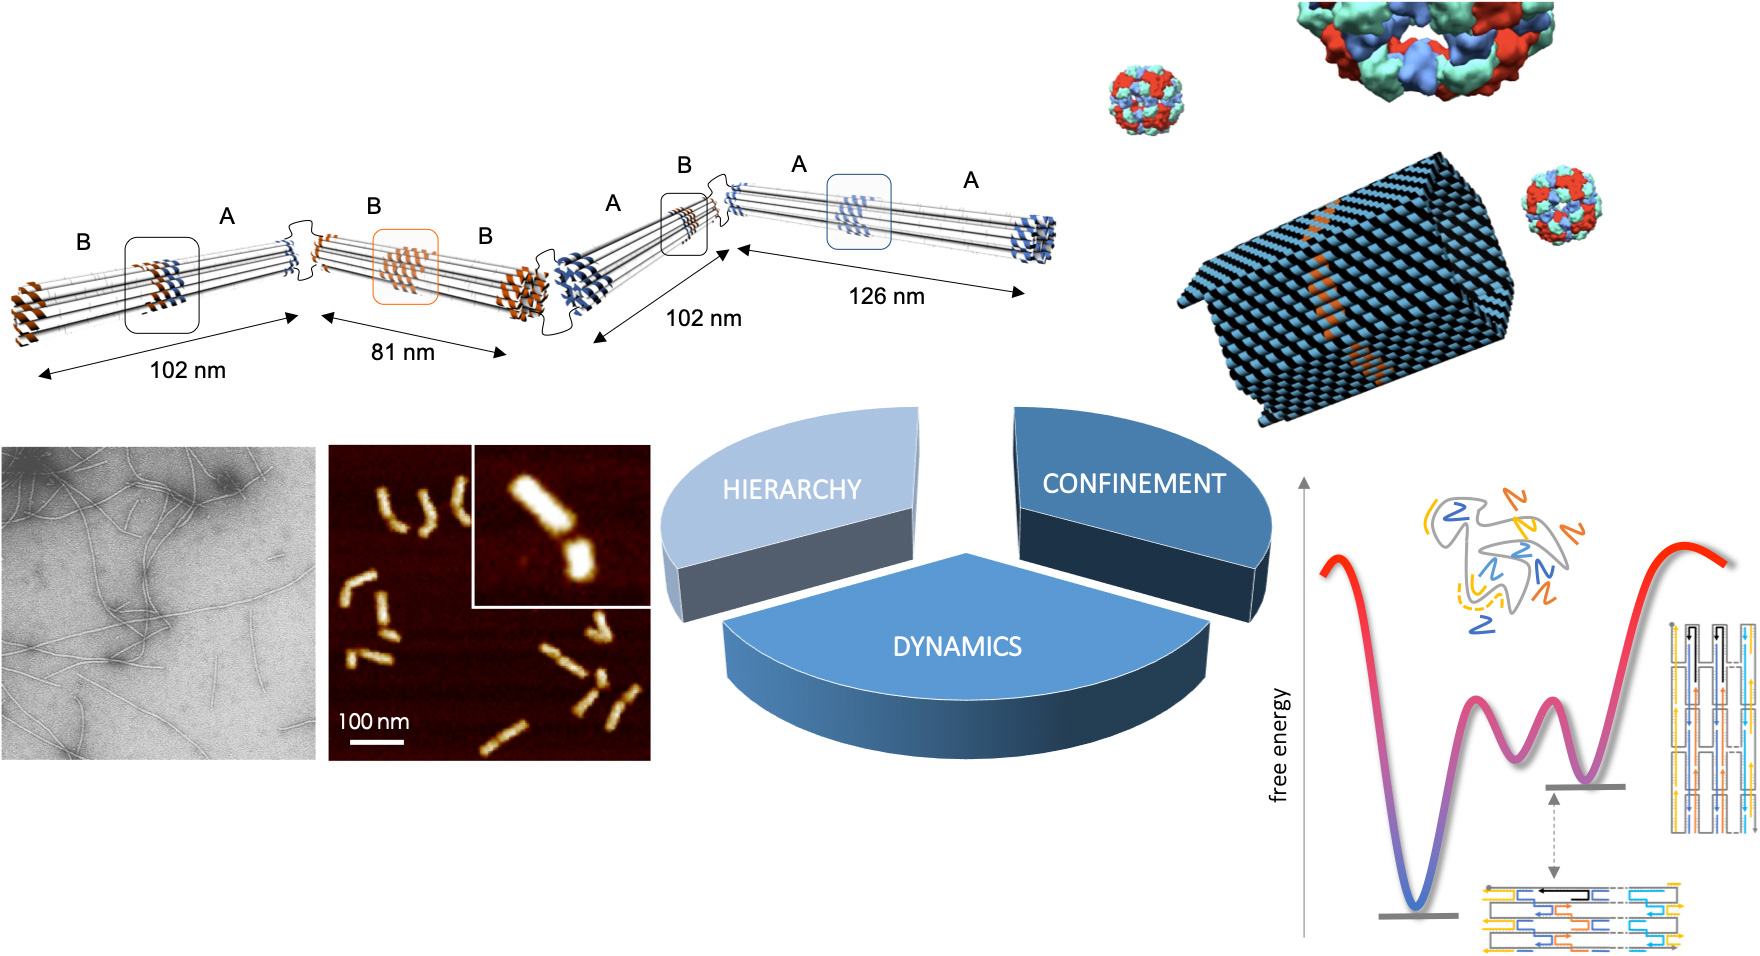 Figure: DNA Nanotechnology - from molecules to self-organized nanostructures